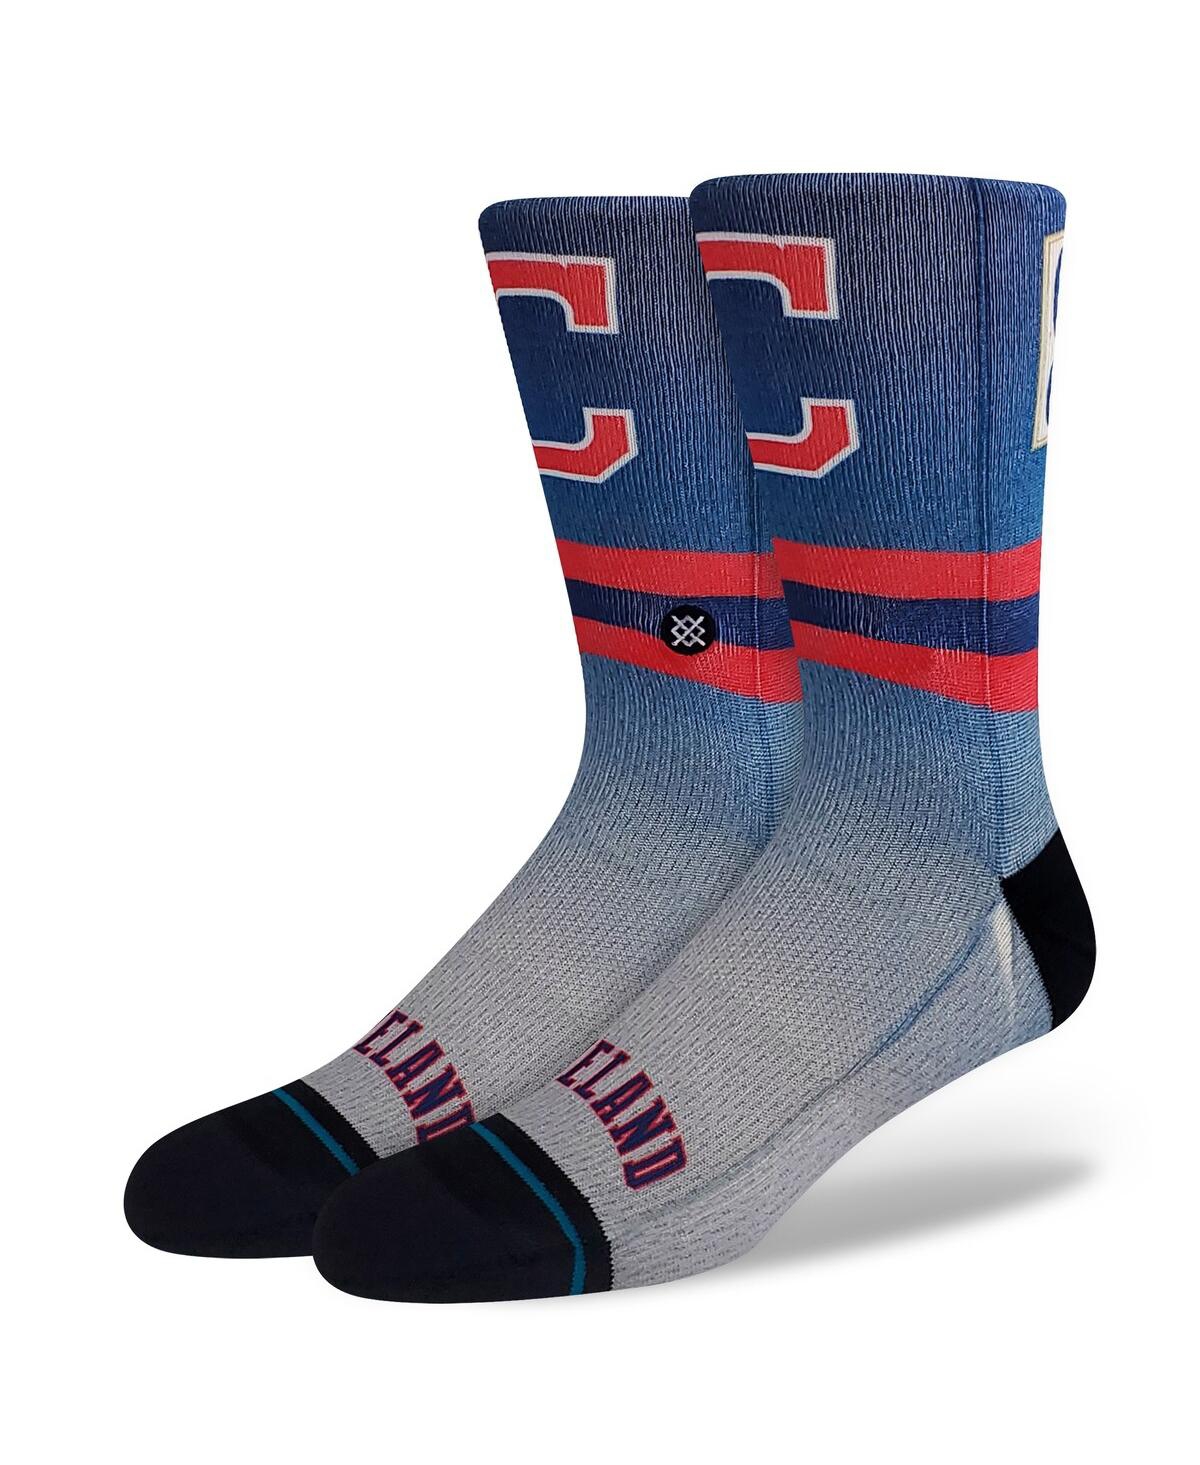 Men's Stance Cleveland Guardians Cooperstown Collection Crew Socks - Multi